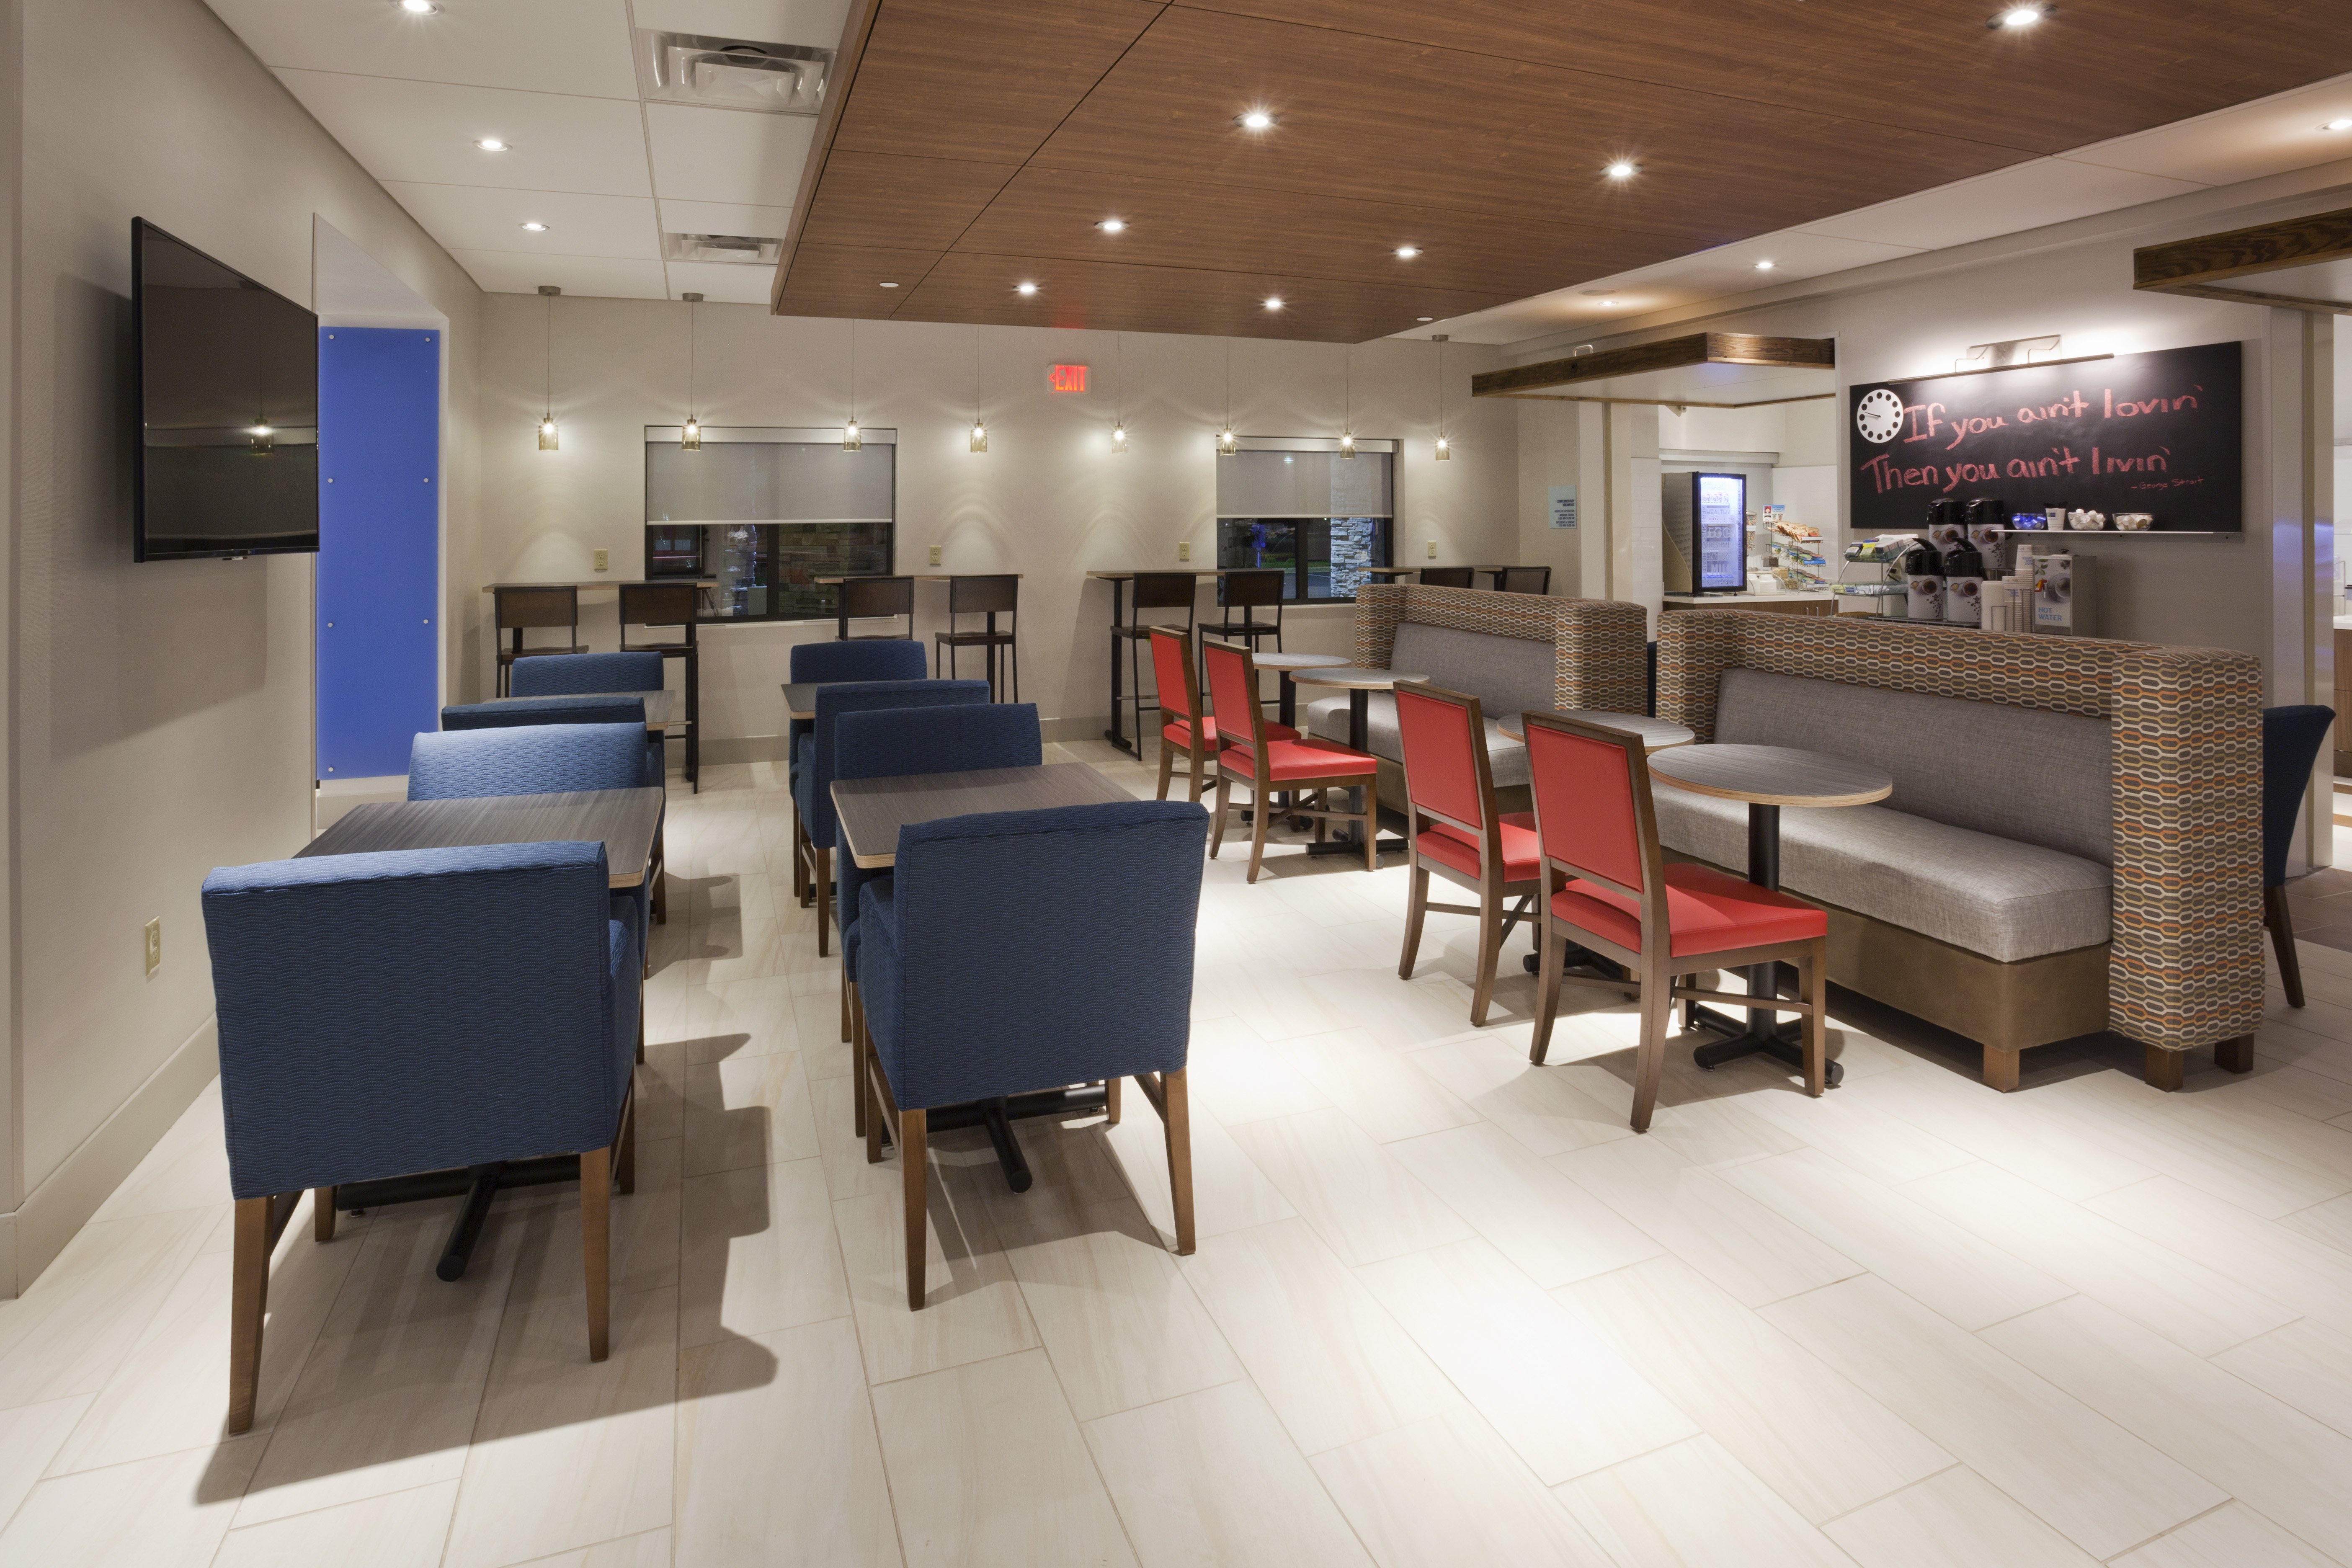 Free breakfast is served every day at the Holiday Inn Express